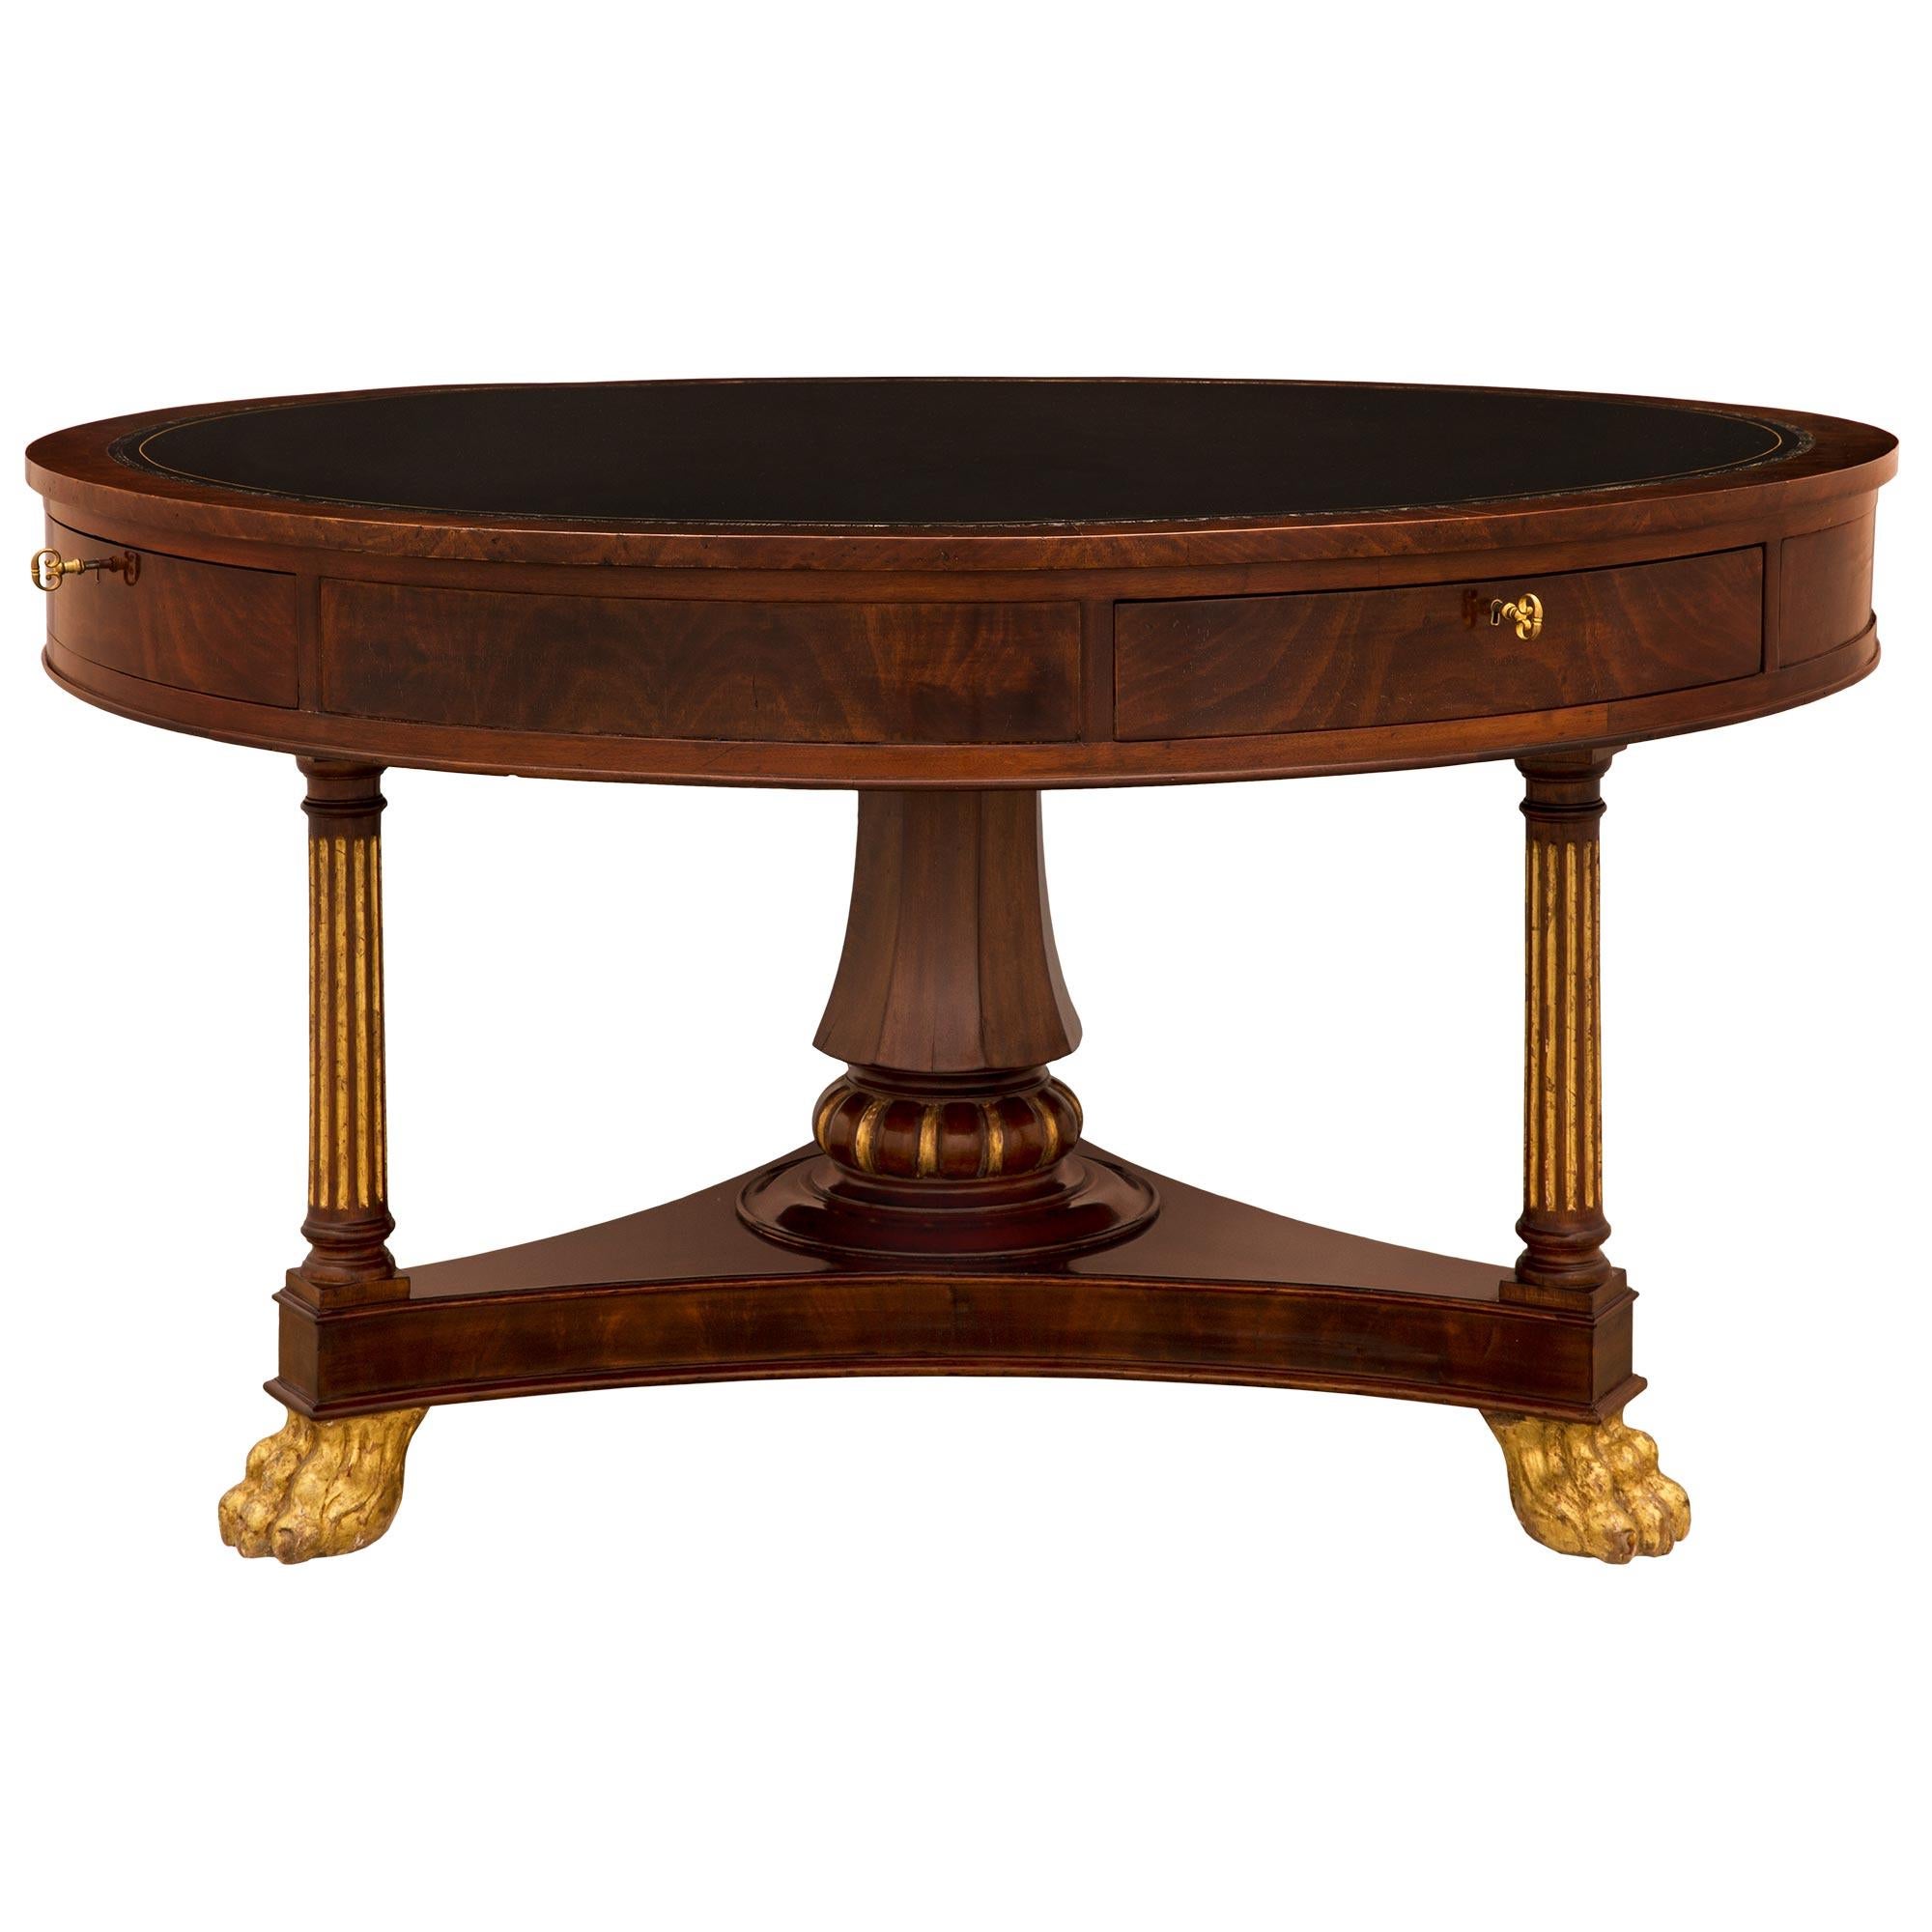 Italian Mid-19th Century Italian Neoclassical Style Mahogany Center Table In Good Condition For Sale In West Palm Beach, FL